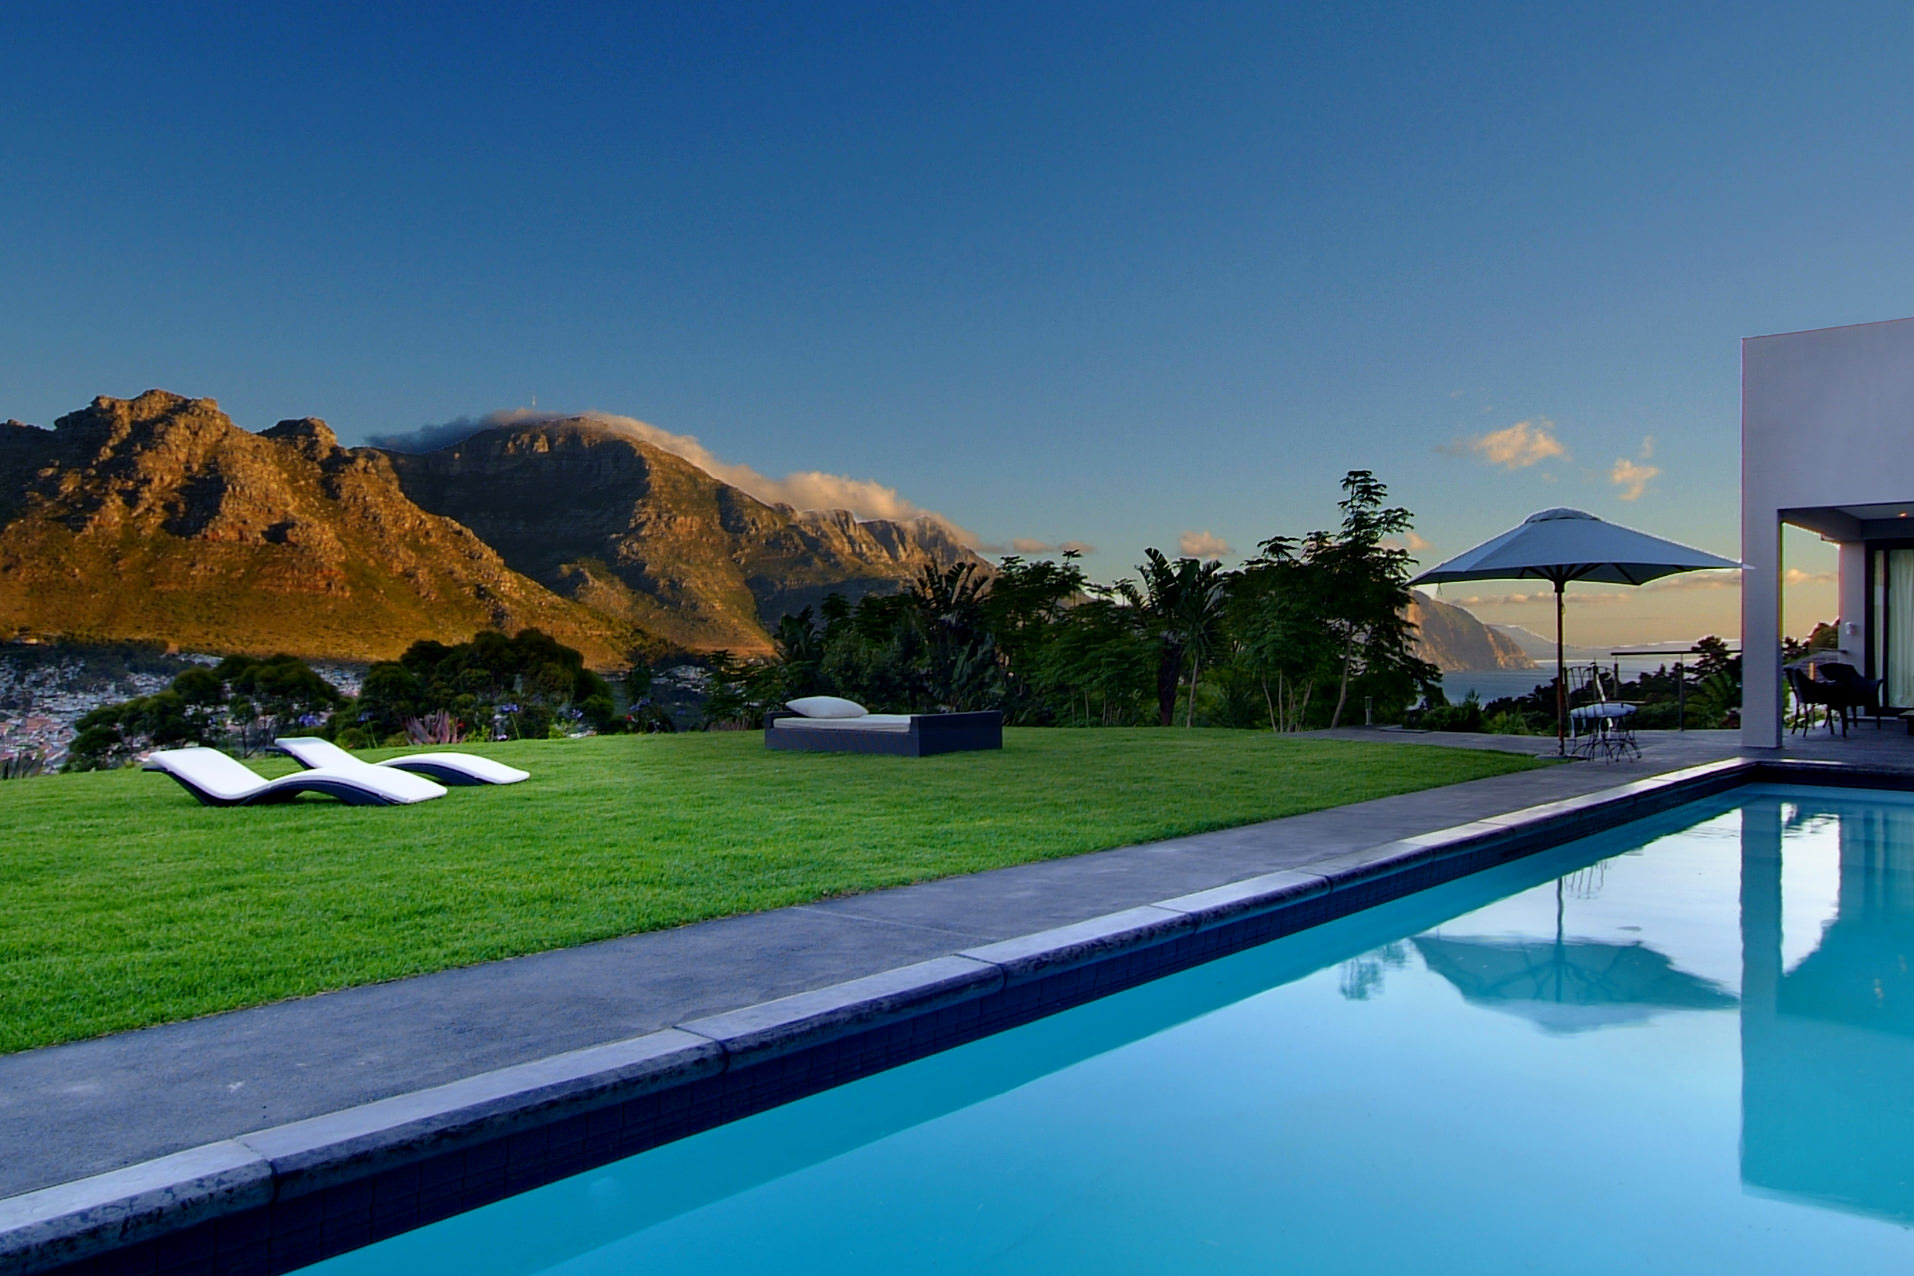 The fantastic view at platinum boutique hotel over mountains and the Atlantic Ocean